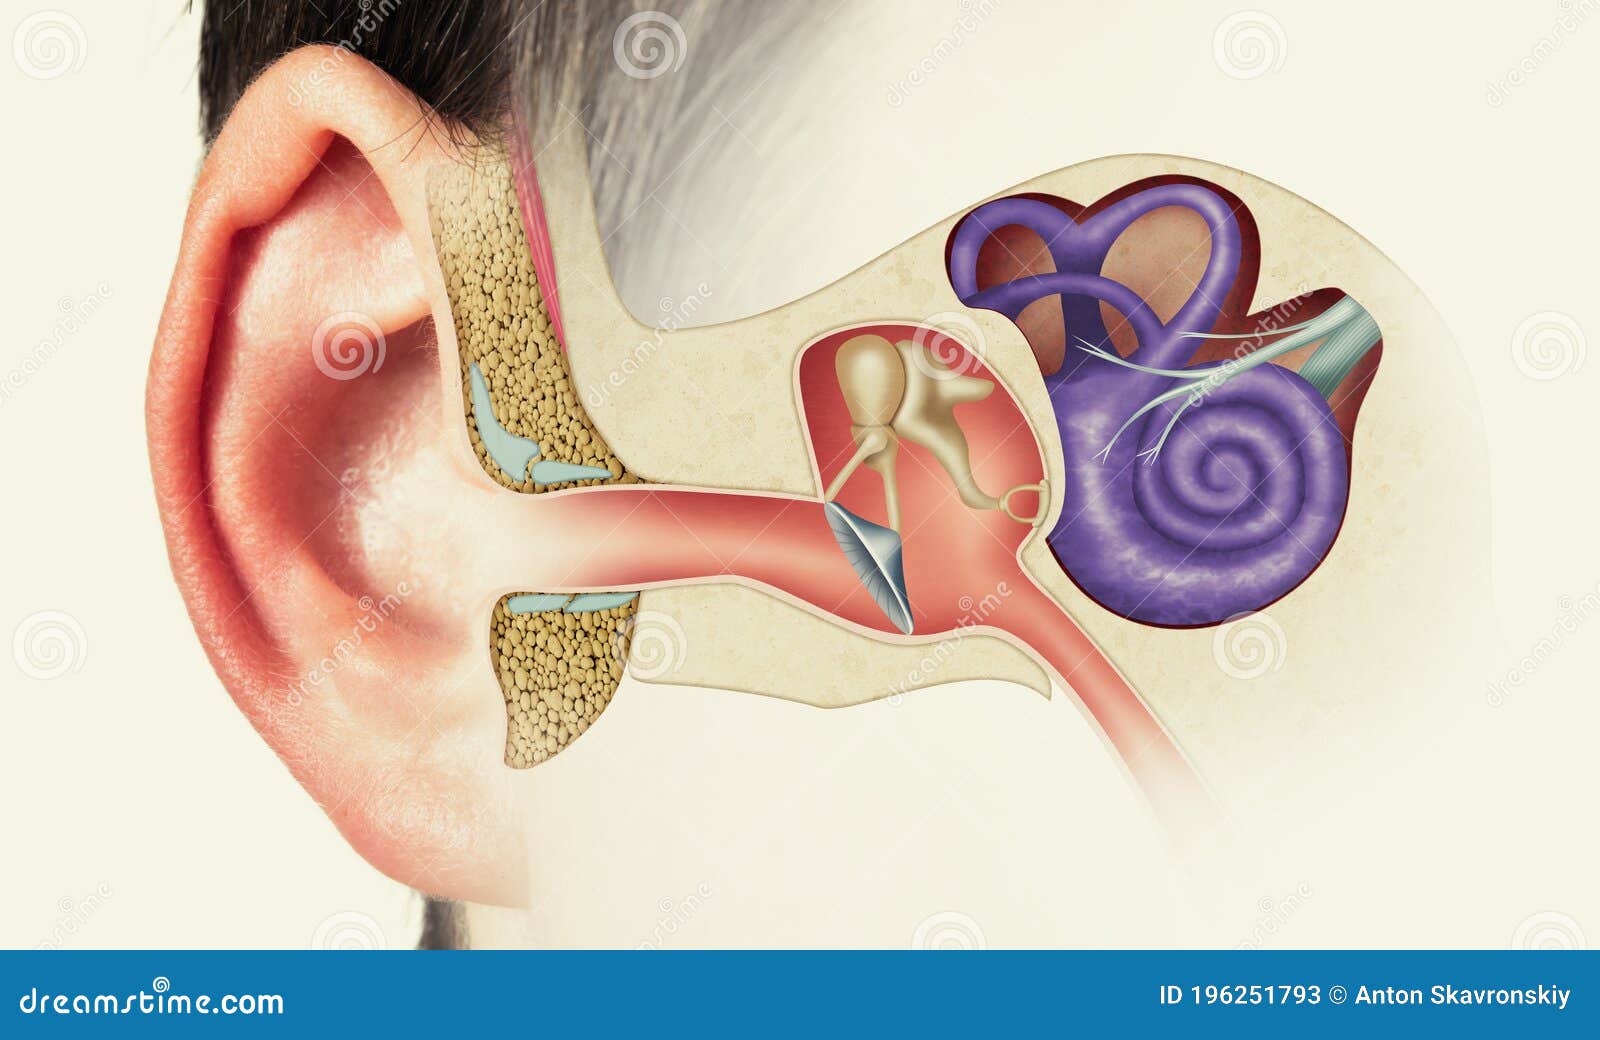 structure of the human ear. image